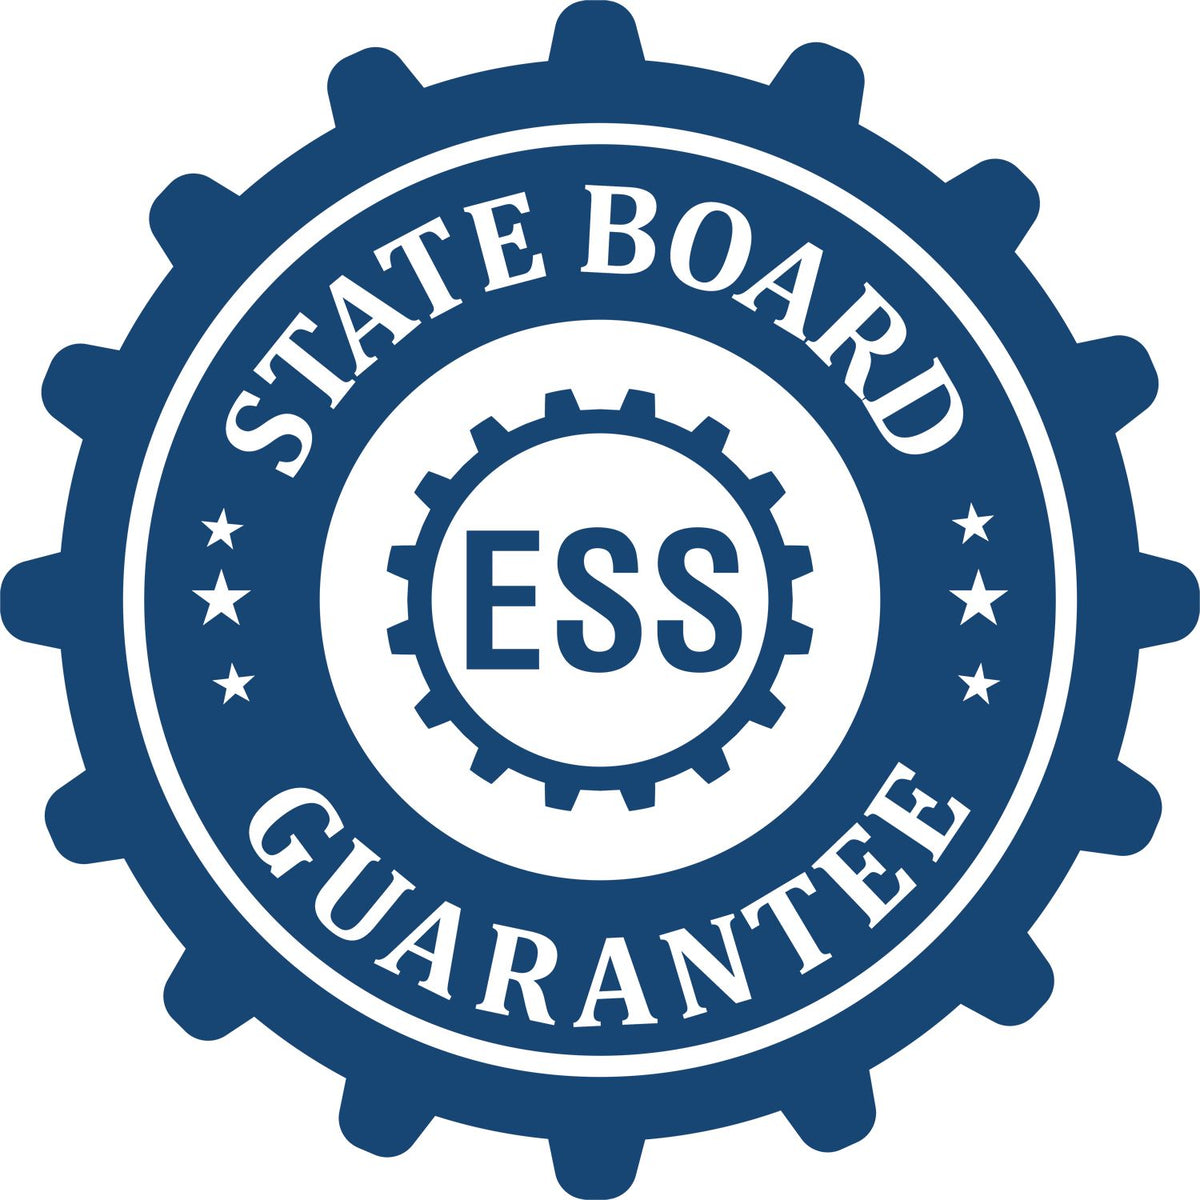 An emblem in a gear shape illustrating a state board guarantee for the District of Columbia Engineer Desk Seal product.